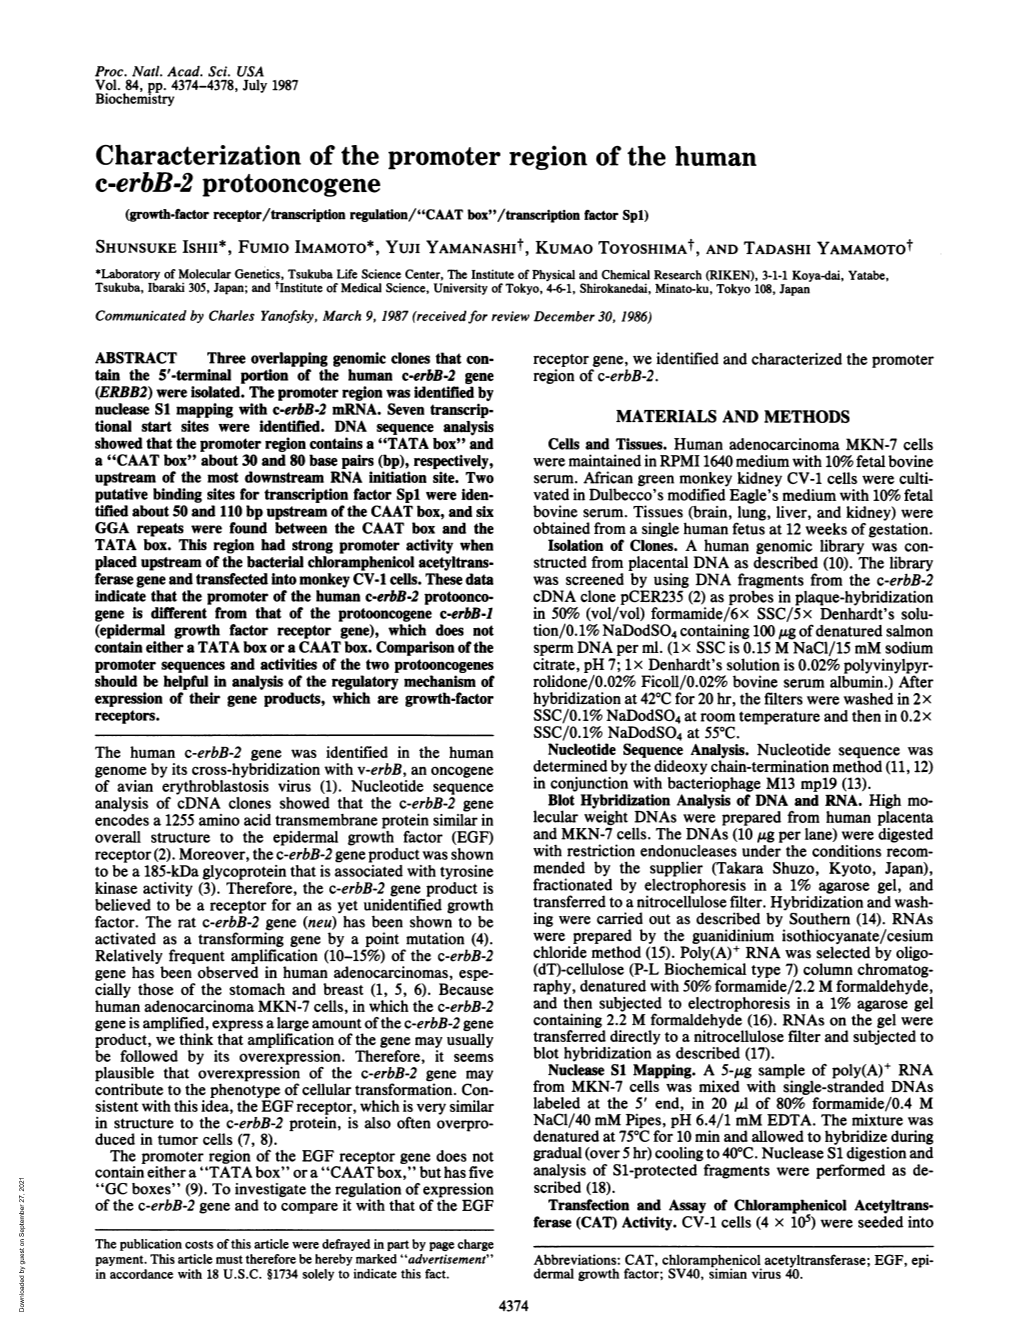 Characterization of the Promoter Region of the Human C-Erbb-2